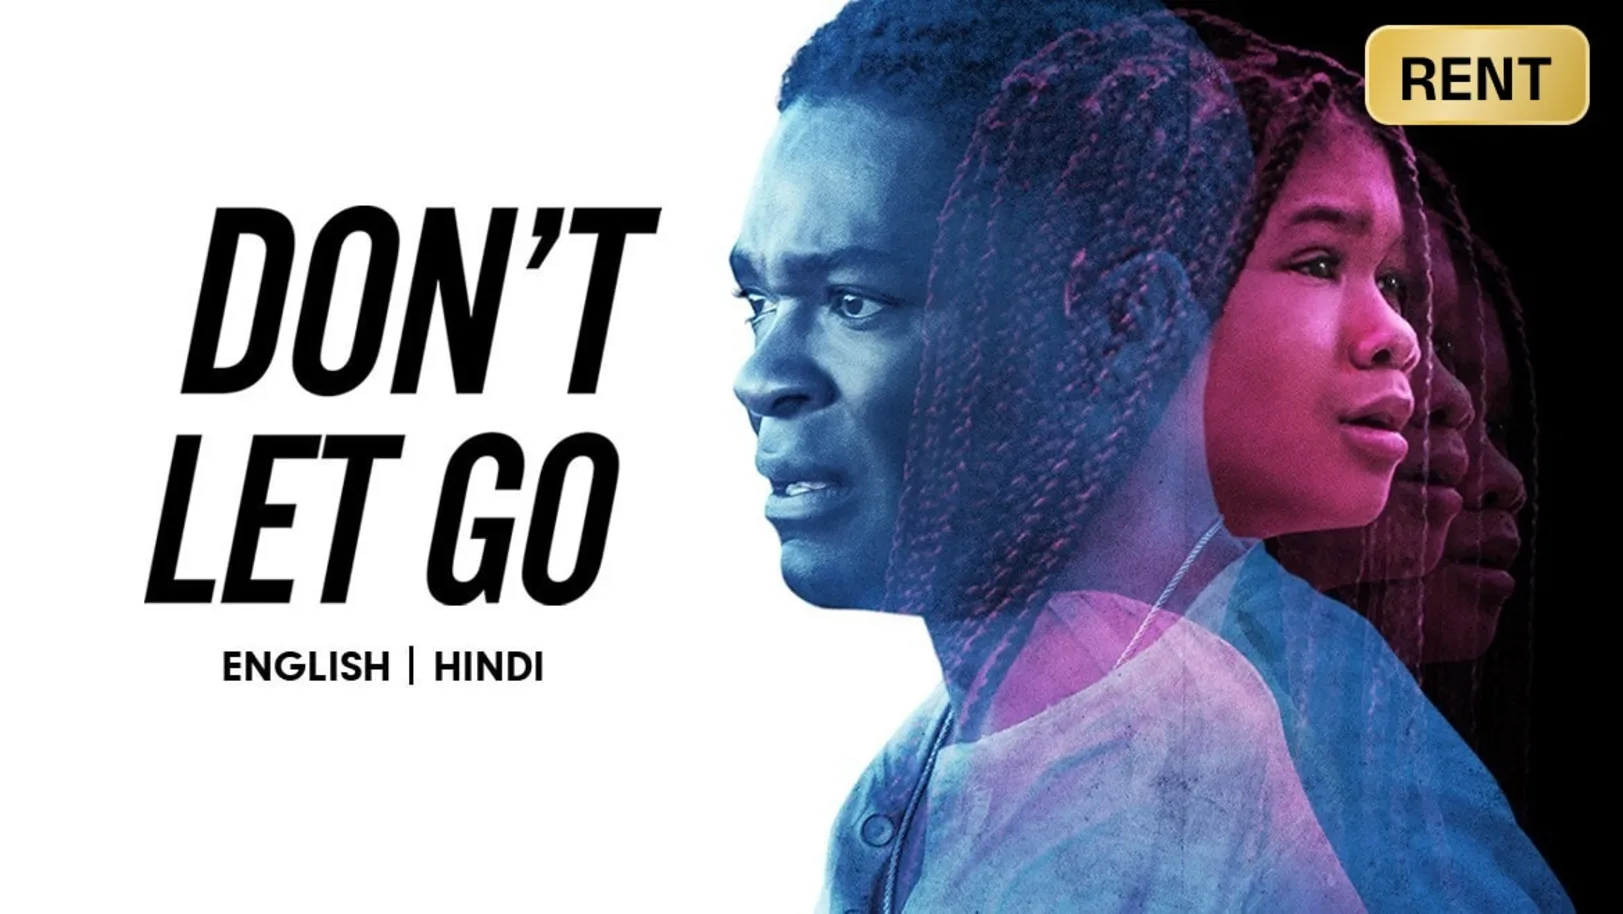 Don't Let Go Movie